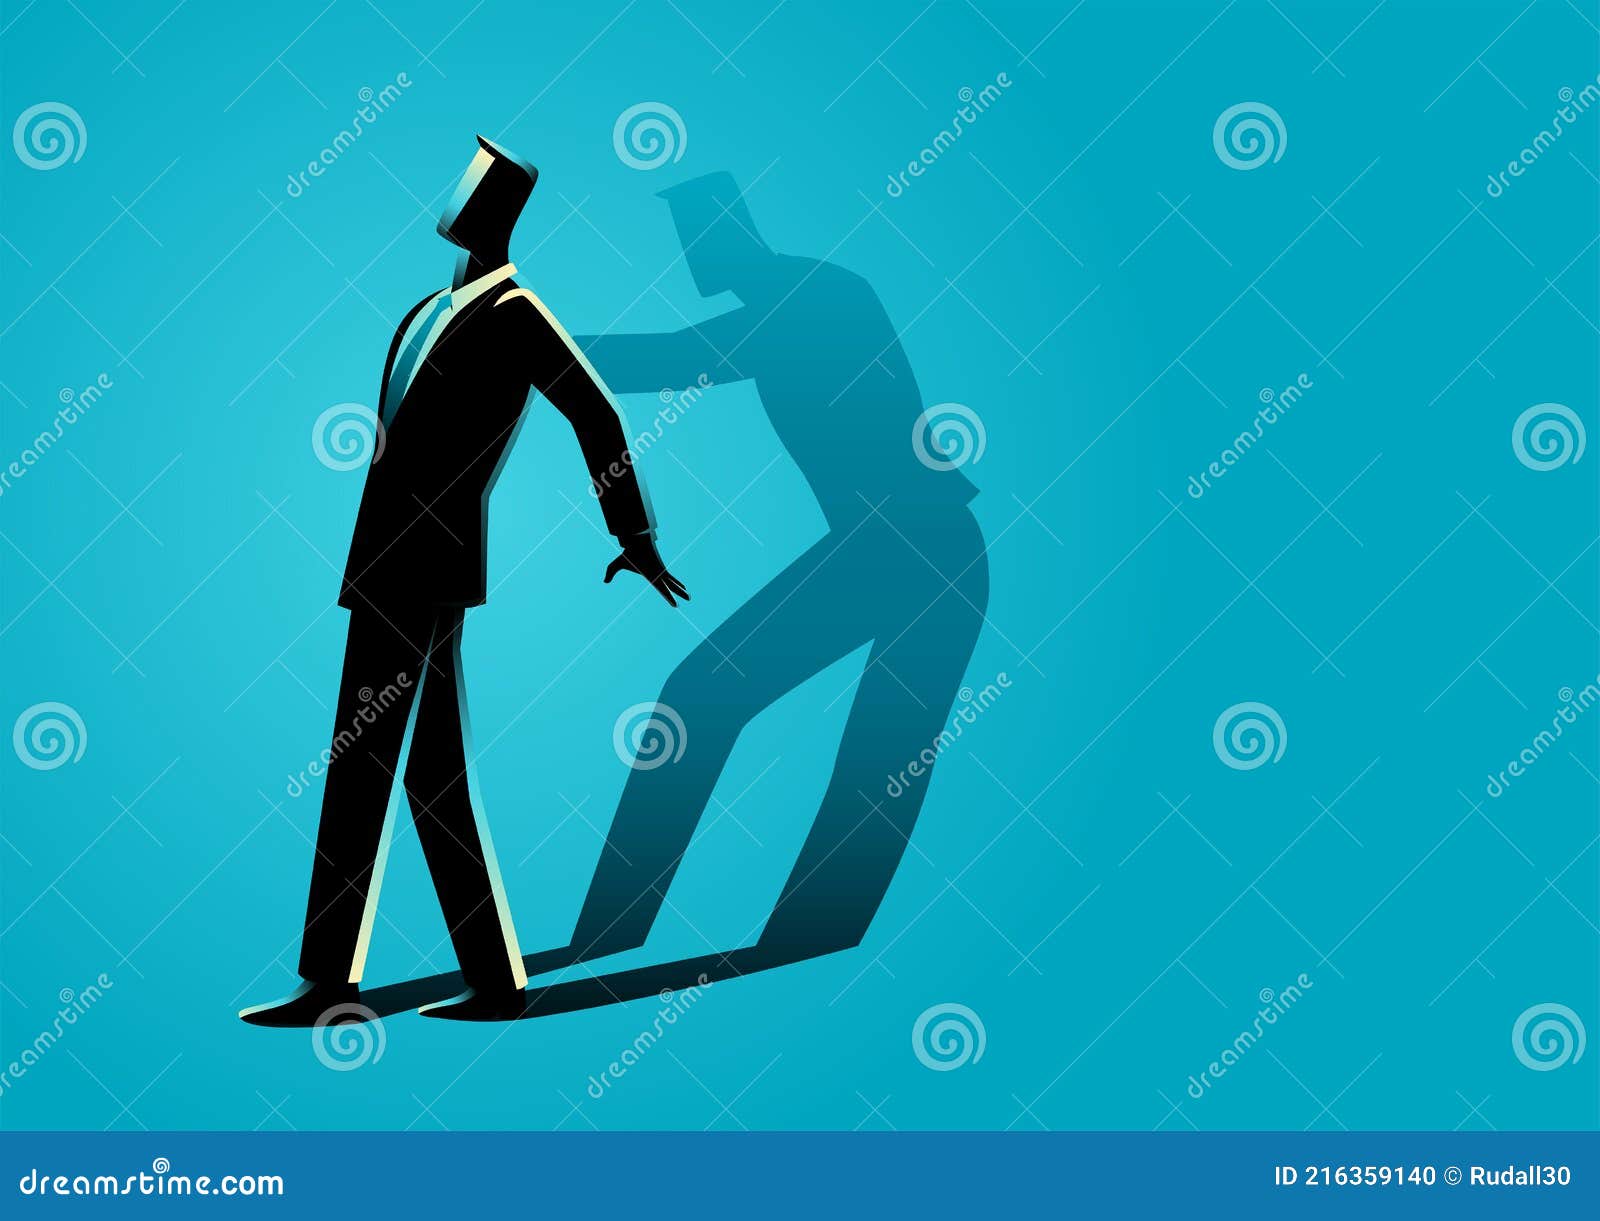 businessman being pushed by his own shadow